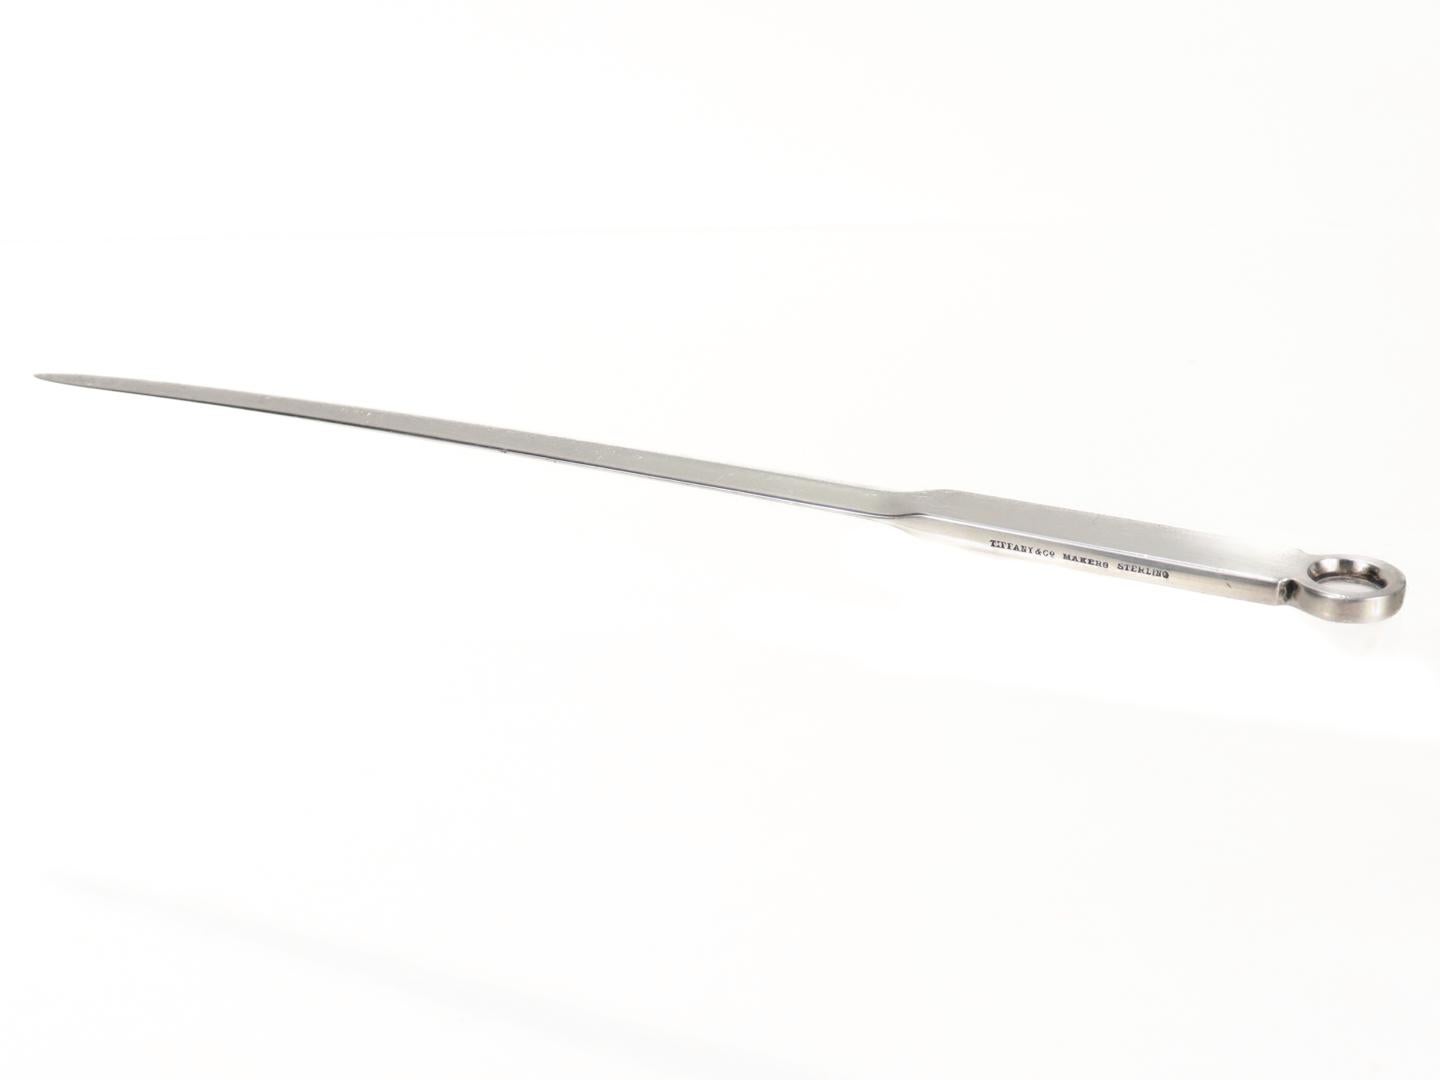 Tiffany & Co. Sterling Silver Meat Skewer (or Letter Opener) In Good Condition For Sale In Philadelphia, PA